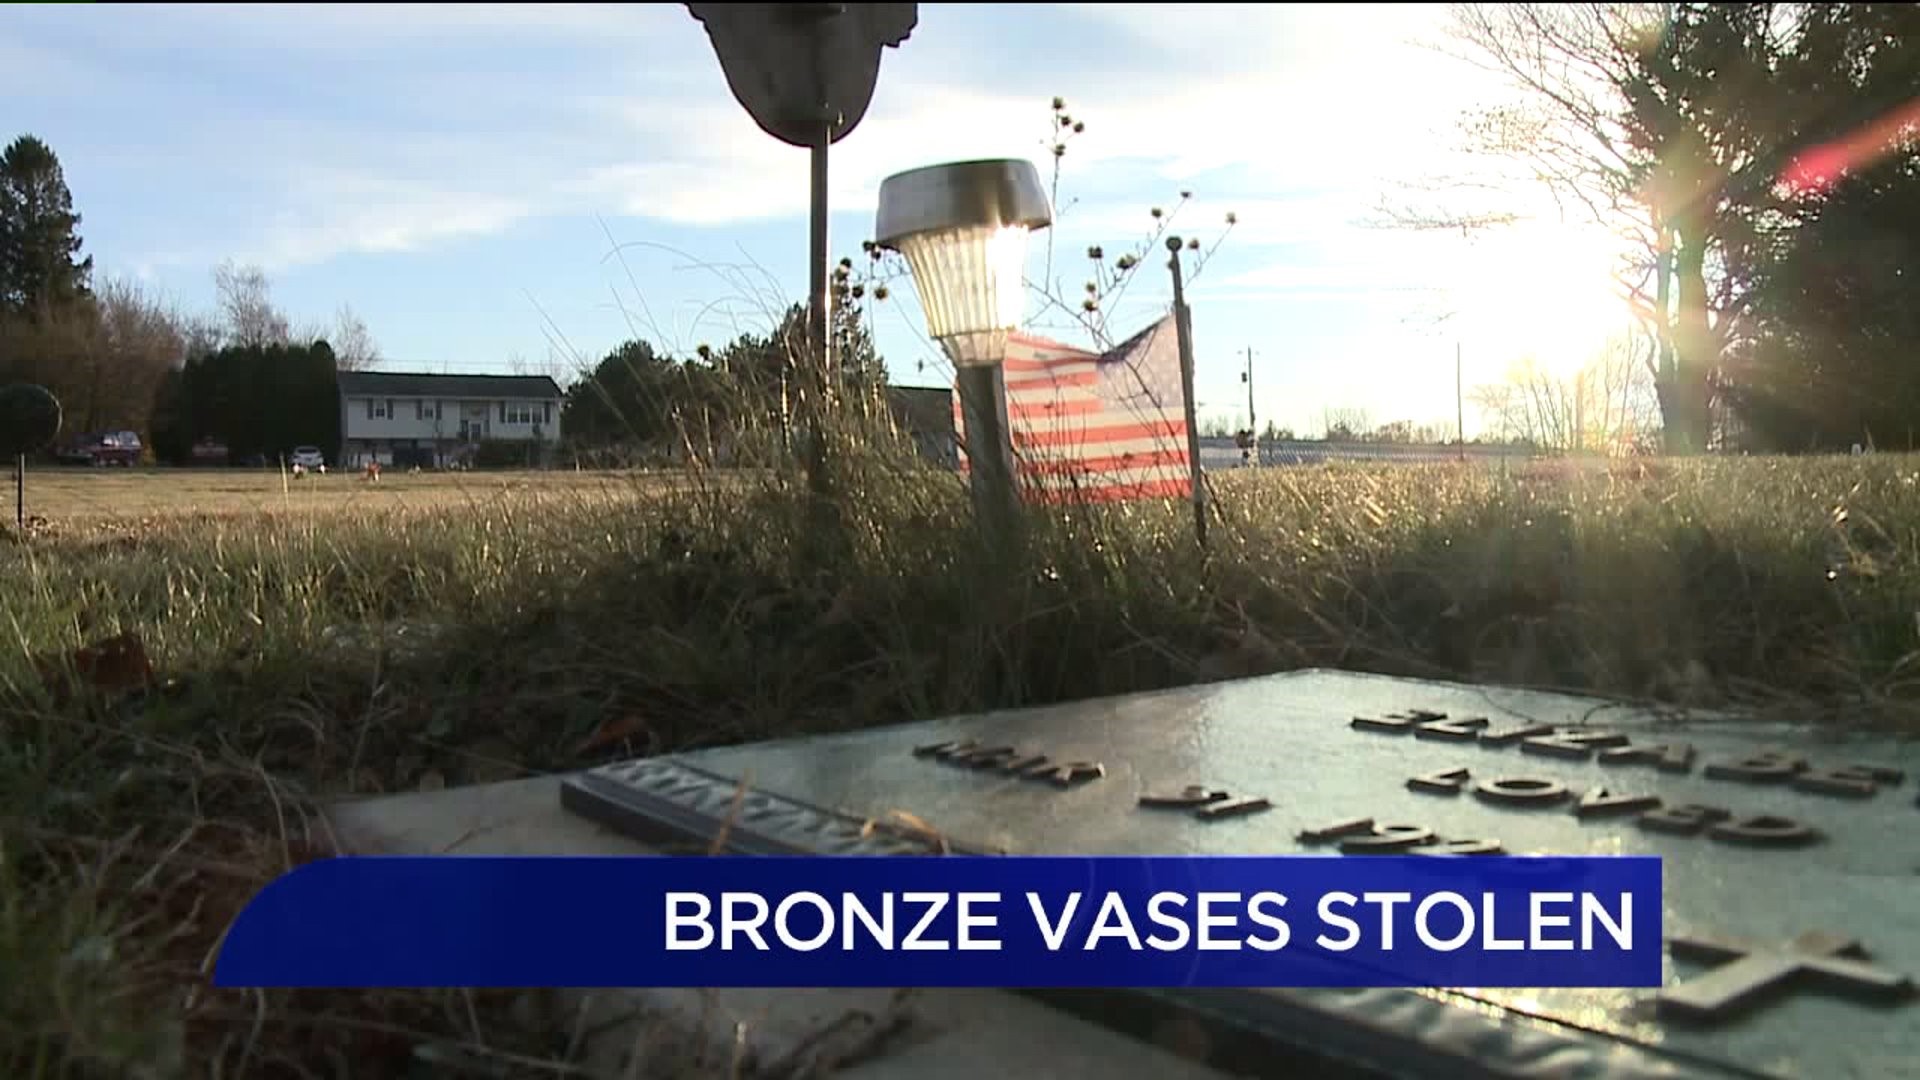 More Than Two Dozen Bronze Vases Taken From Grave Markers Inside Cemetery